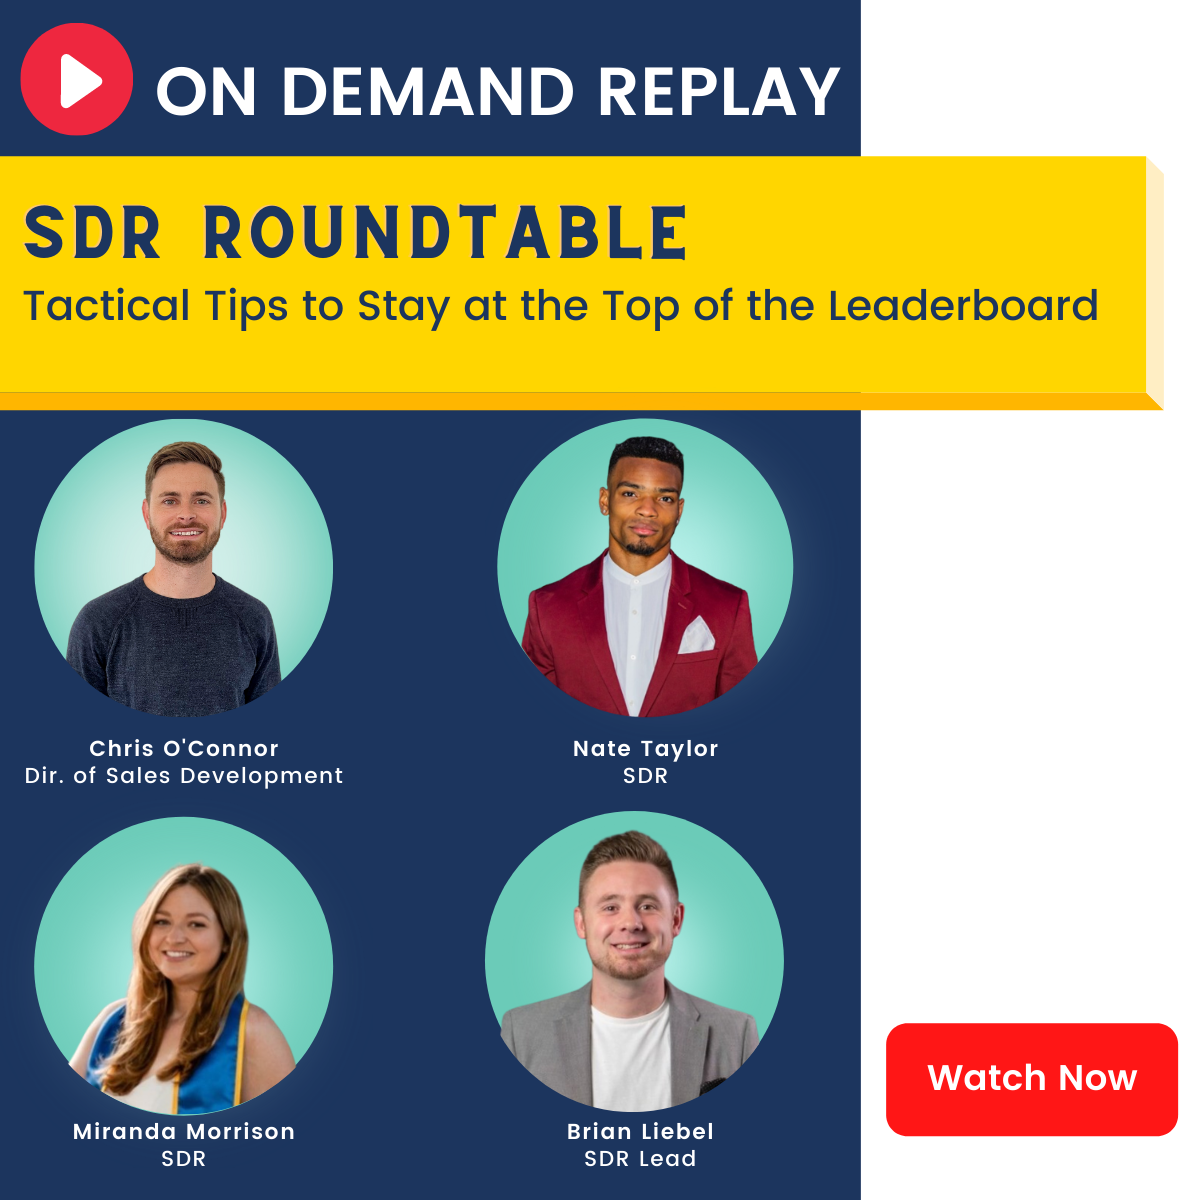 SDR Session - Watch Now